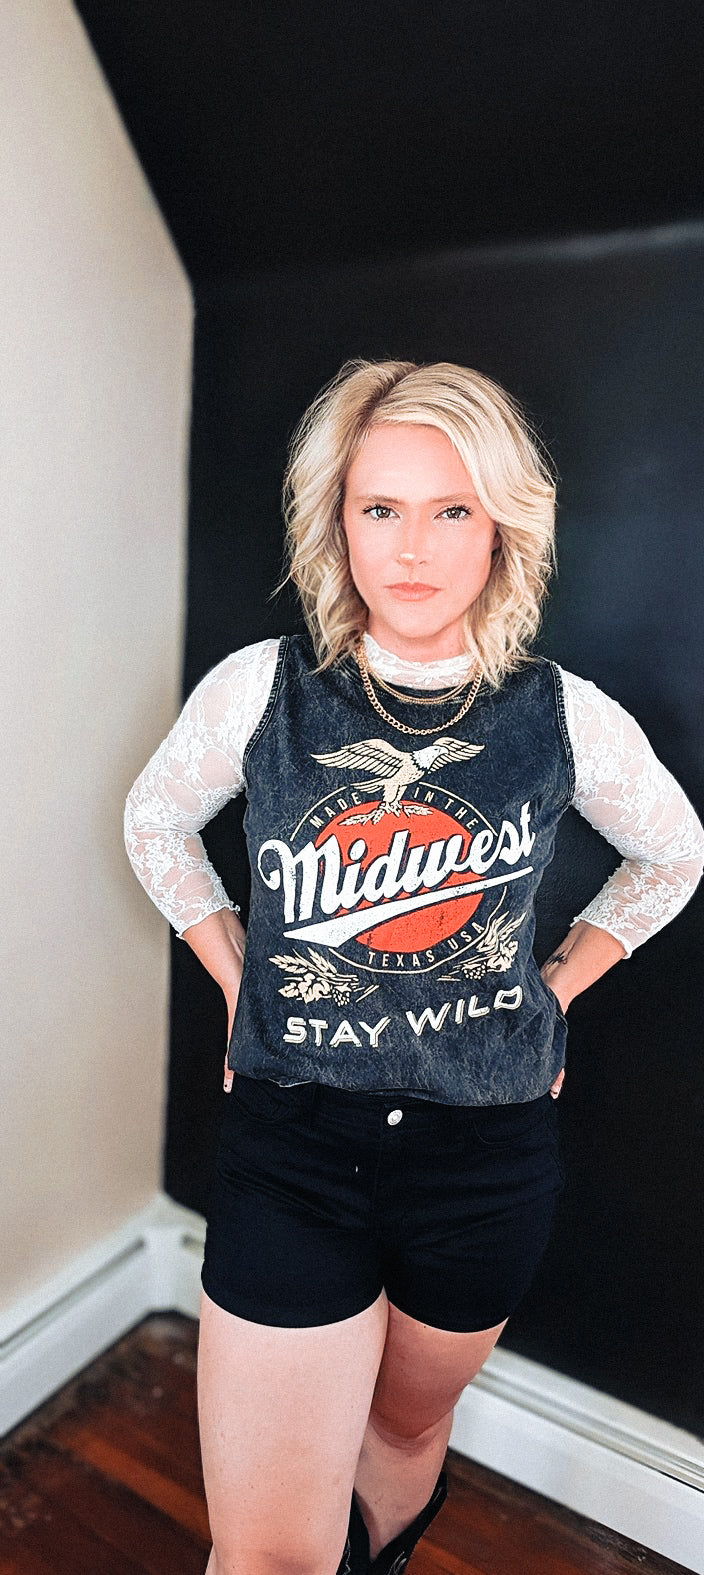 Midwest Stay Wild Graphic Tank Top